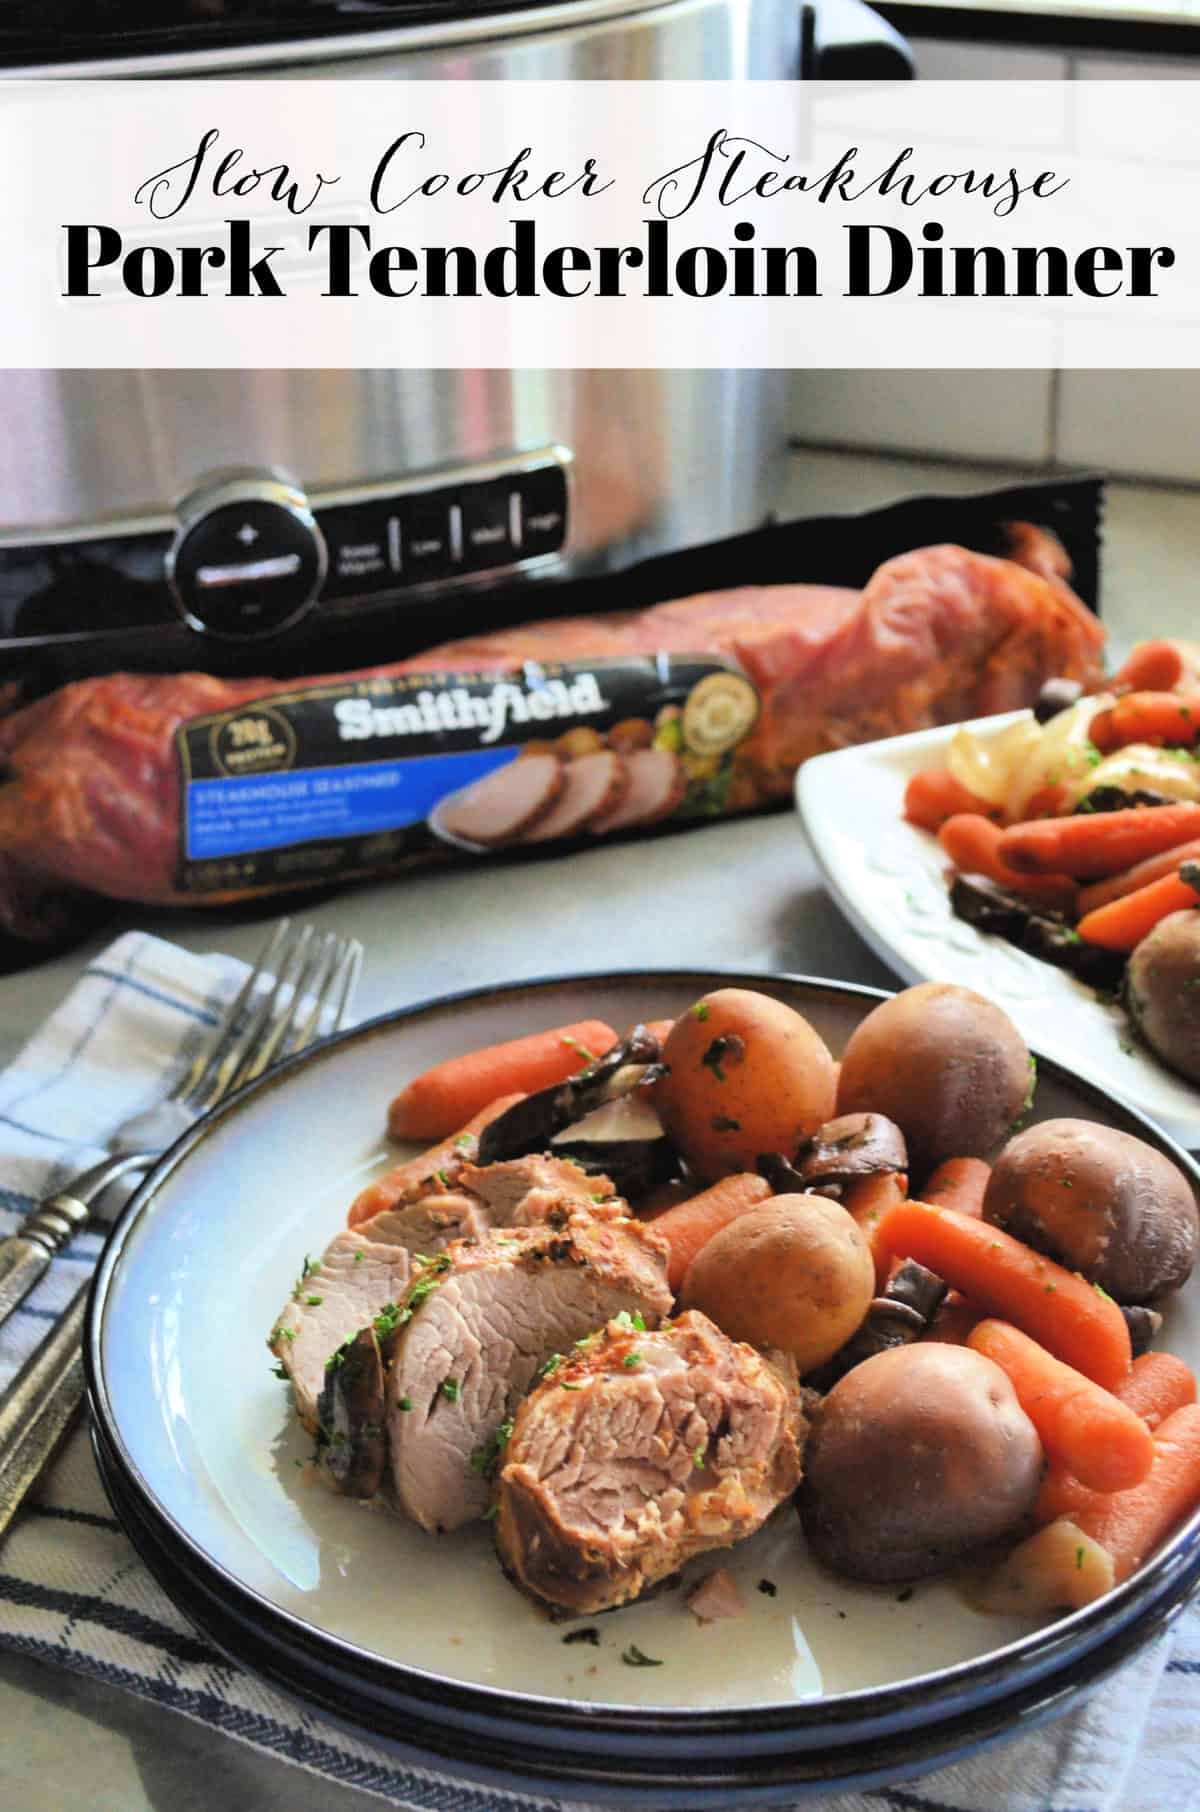 Sliced Pork tenderloin plated with vegetables in front of Smithfield tenderloin and instant pot with title text.